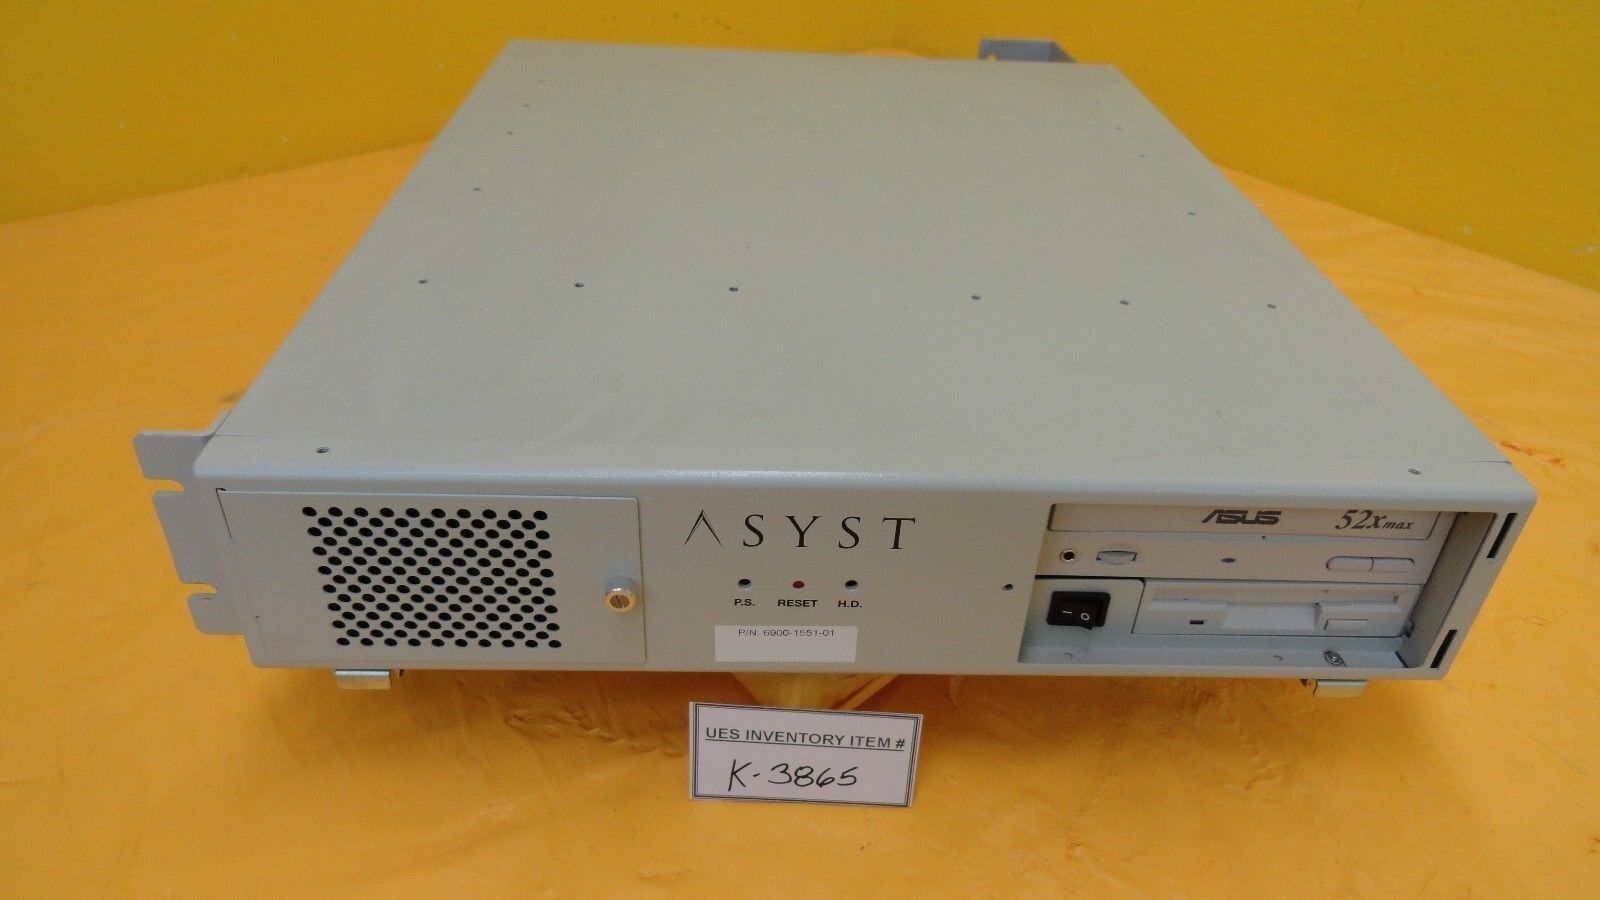 Asyst Technologies 6900-1551-01 System Controller ASM Epsilon 3000 Working Spare